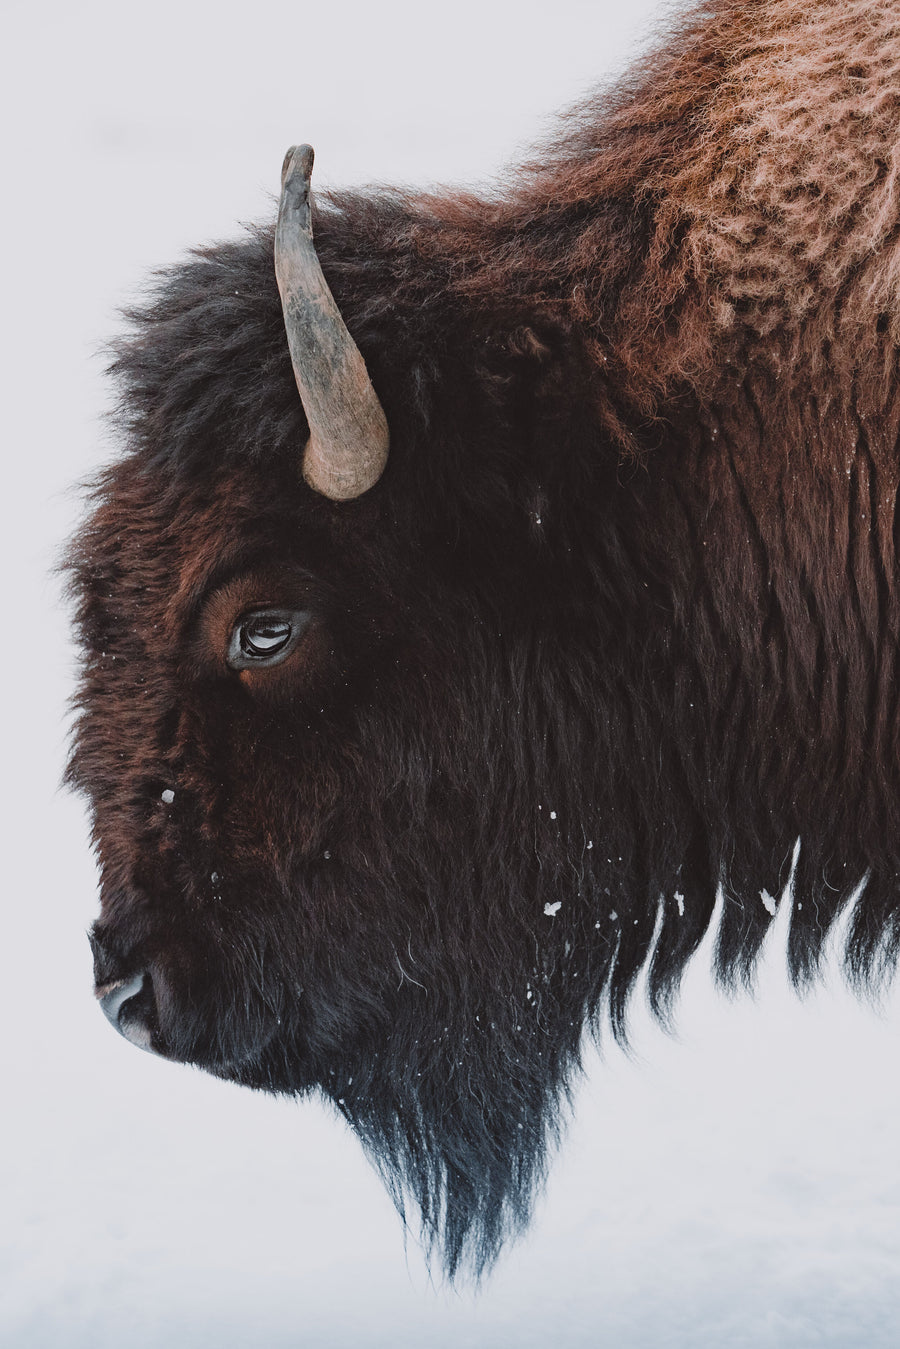 Bison photo in snow